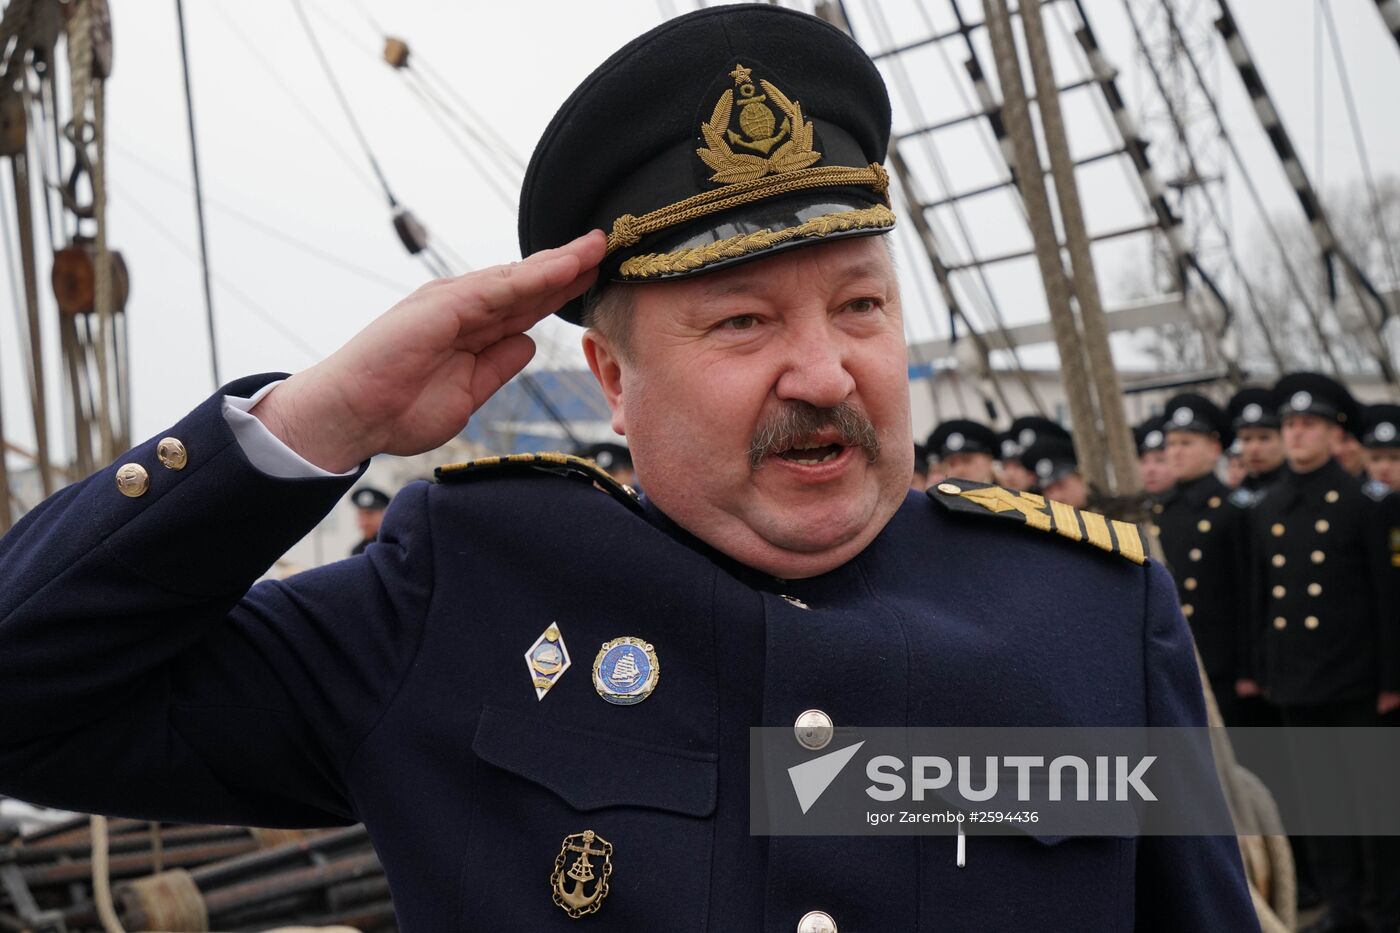 The Sedov training sailing-ship sets sail on voyage marking 70th anniversary of Great Victory